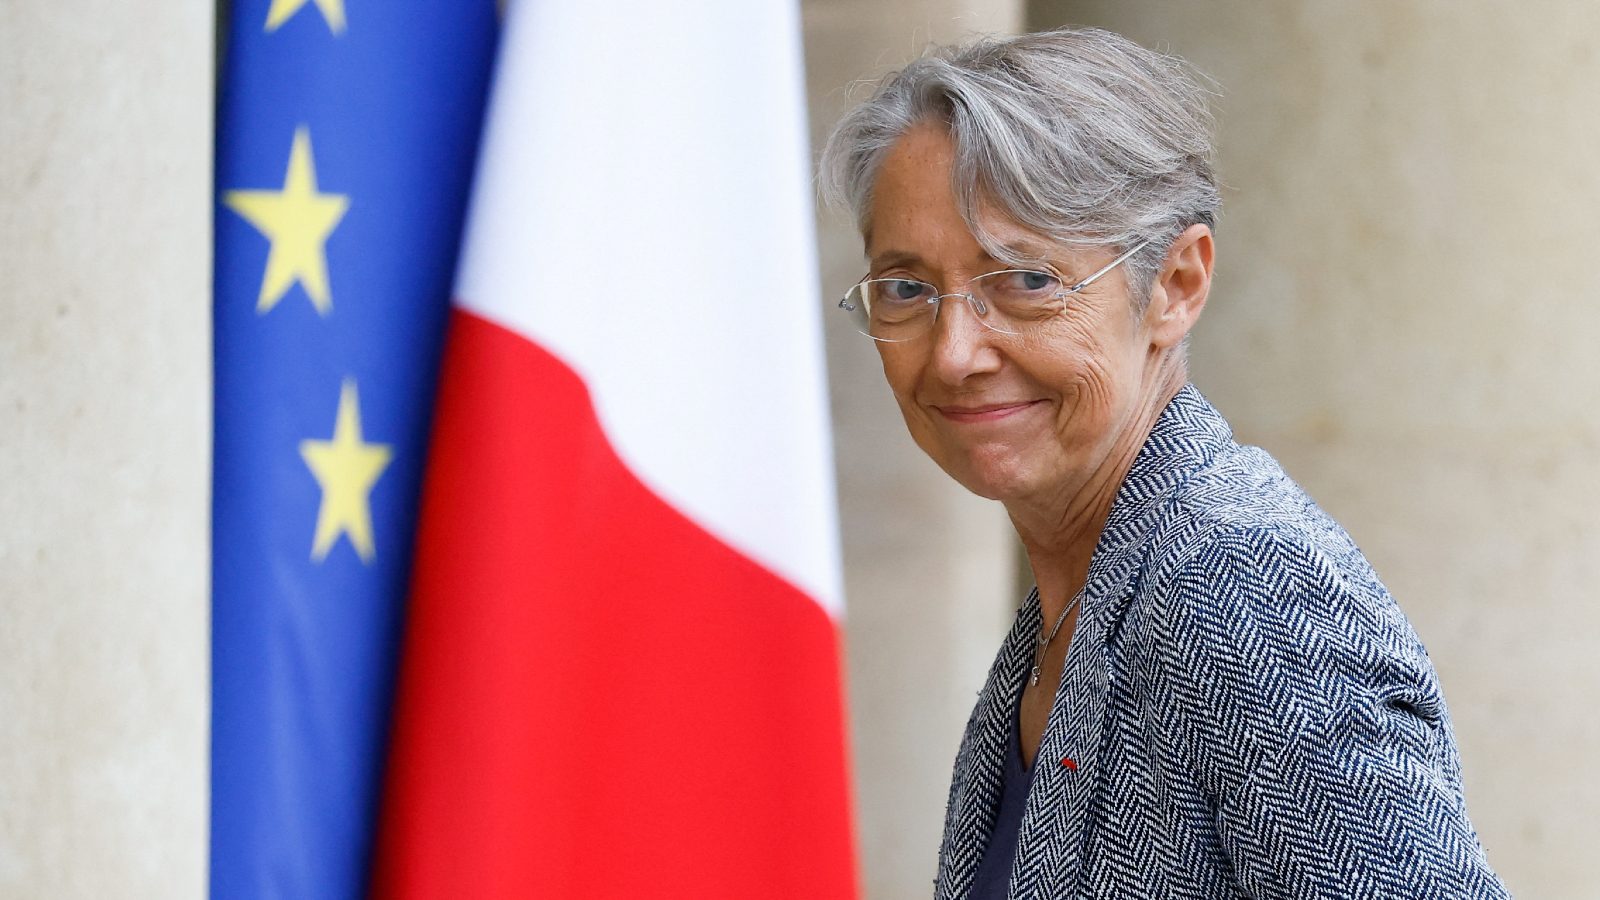 How Loss Of A Loved One Shaped France's New PM Élisabeth Borne - News18